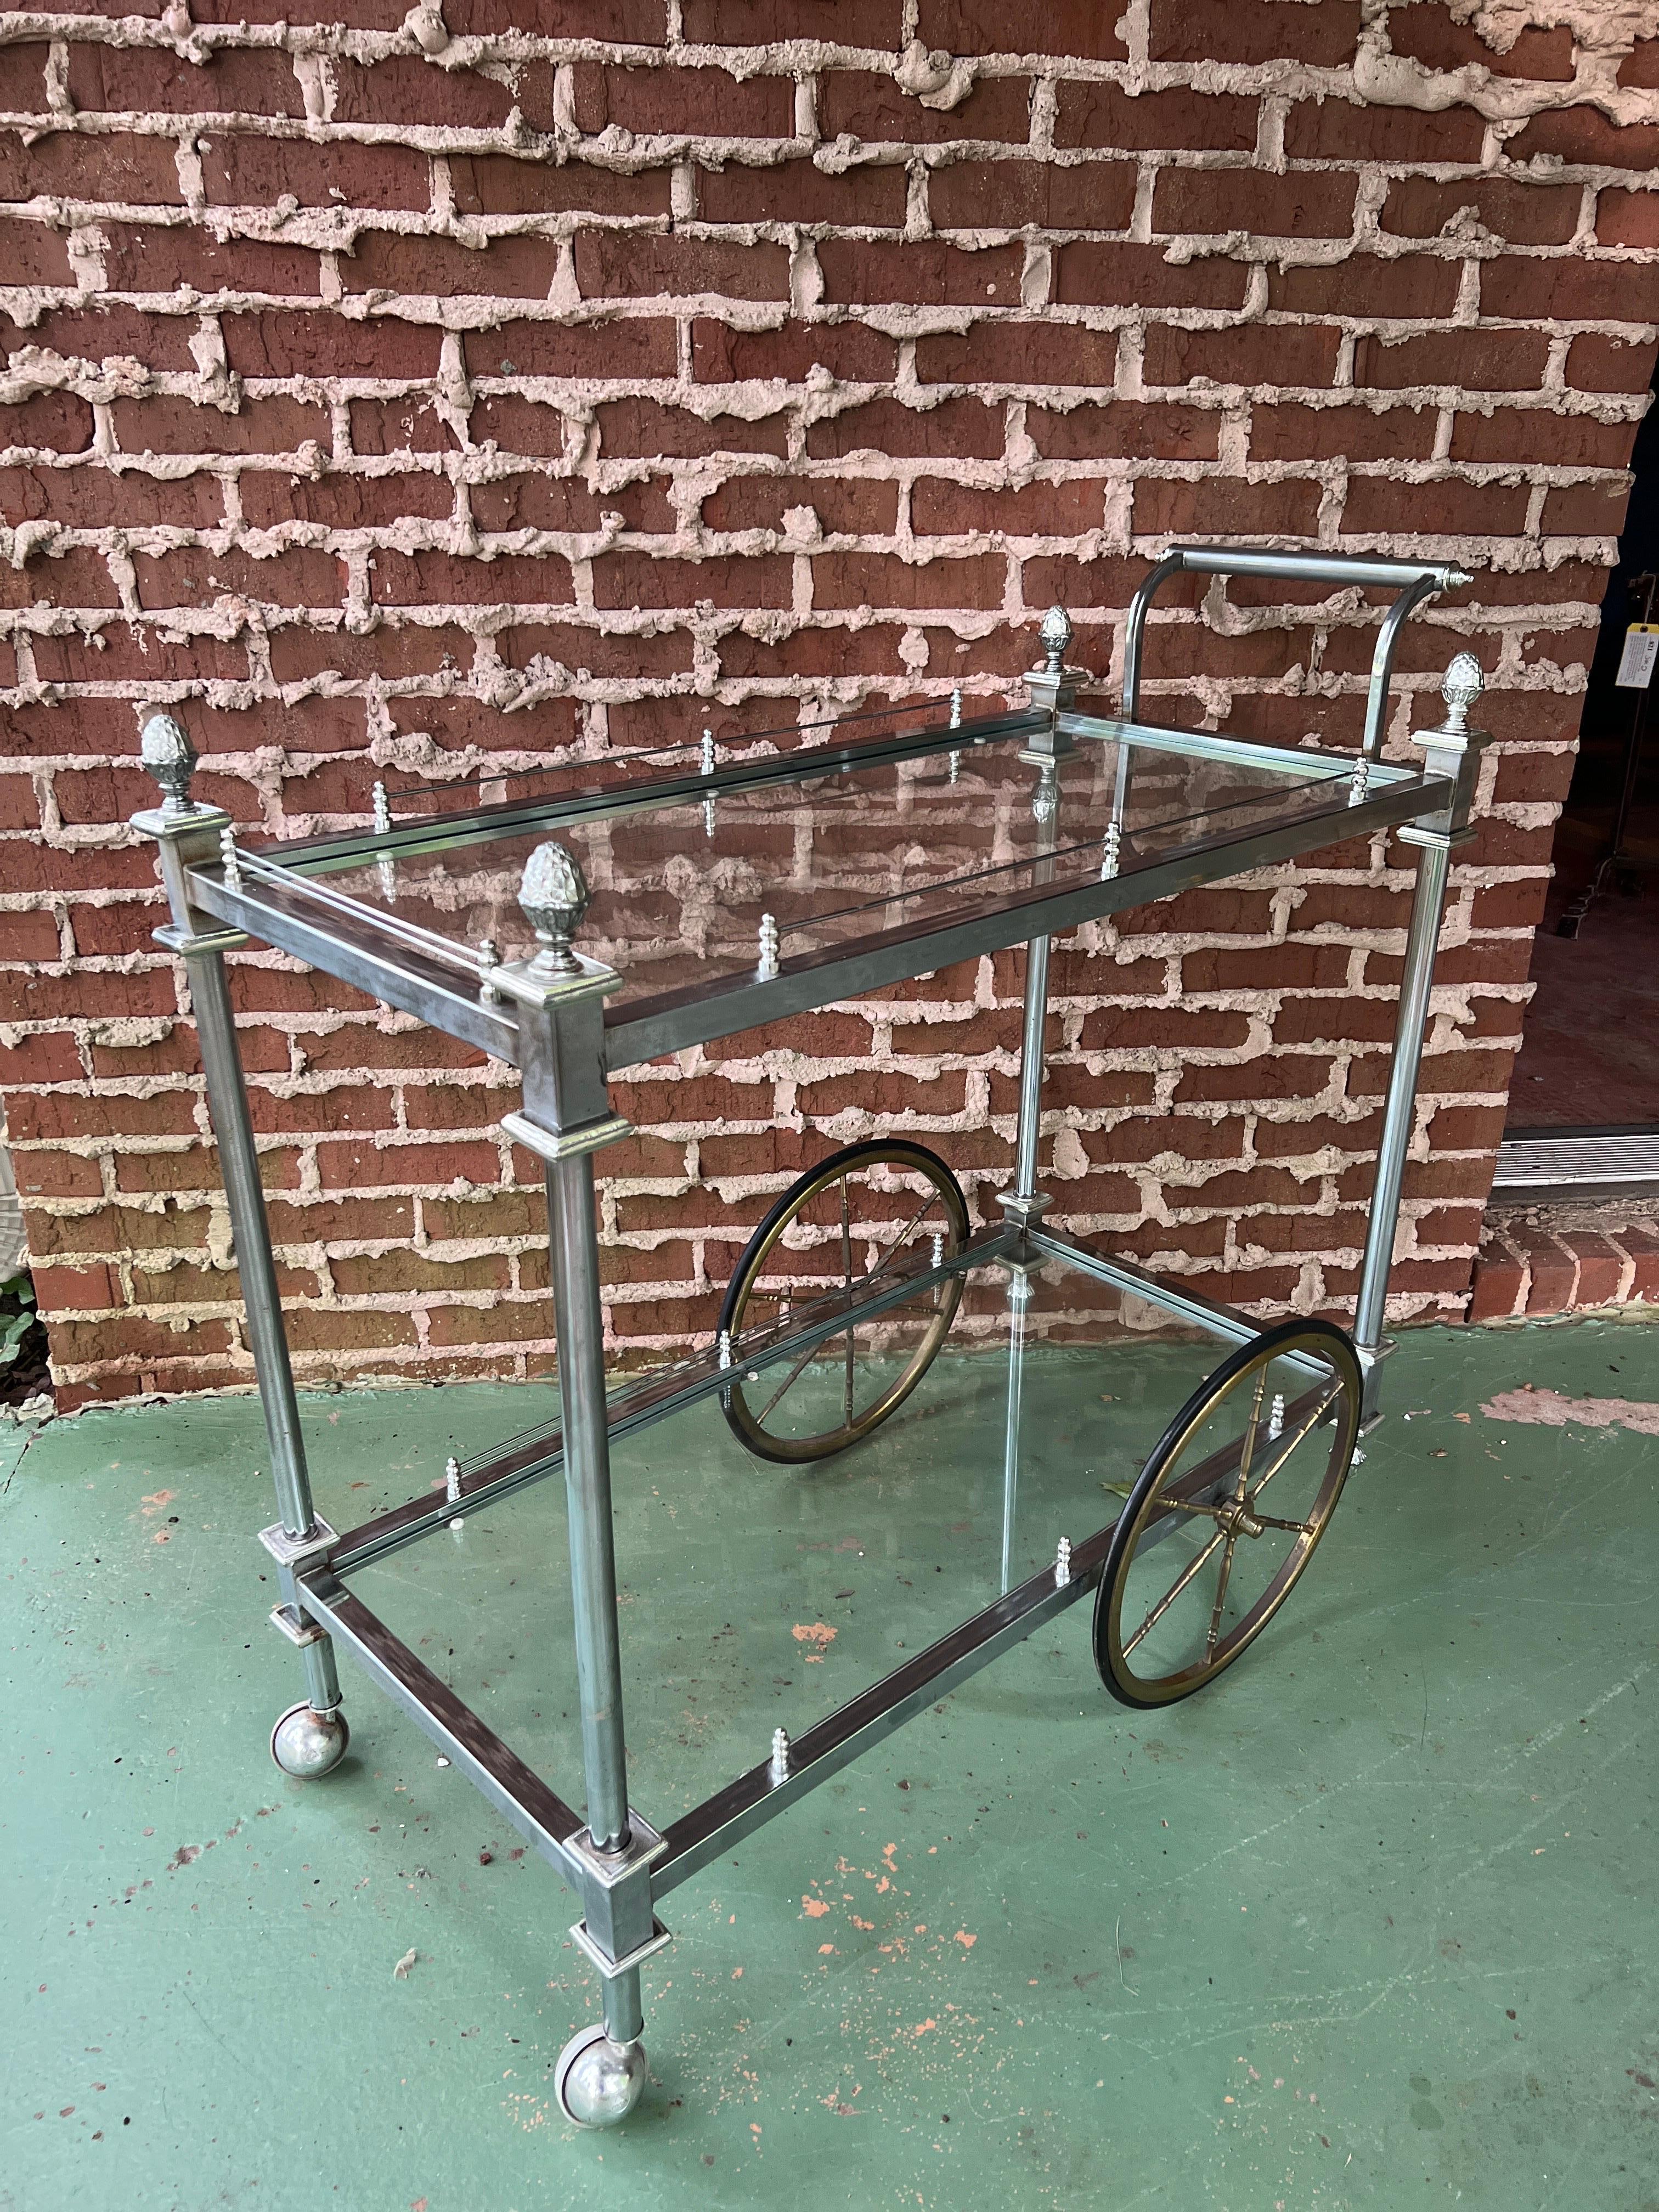 French, Circa early 20th century.

A very well crafted French rolling bar cart in the style of Maison Jansen. The cart features a mixed metal frame, steel or chrome body and brass acorn finials. 

The bar has a wired edge trim on both levels and